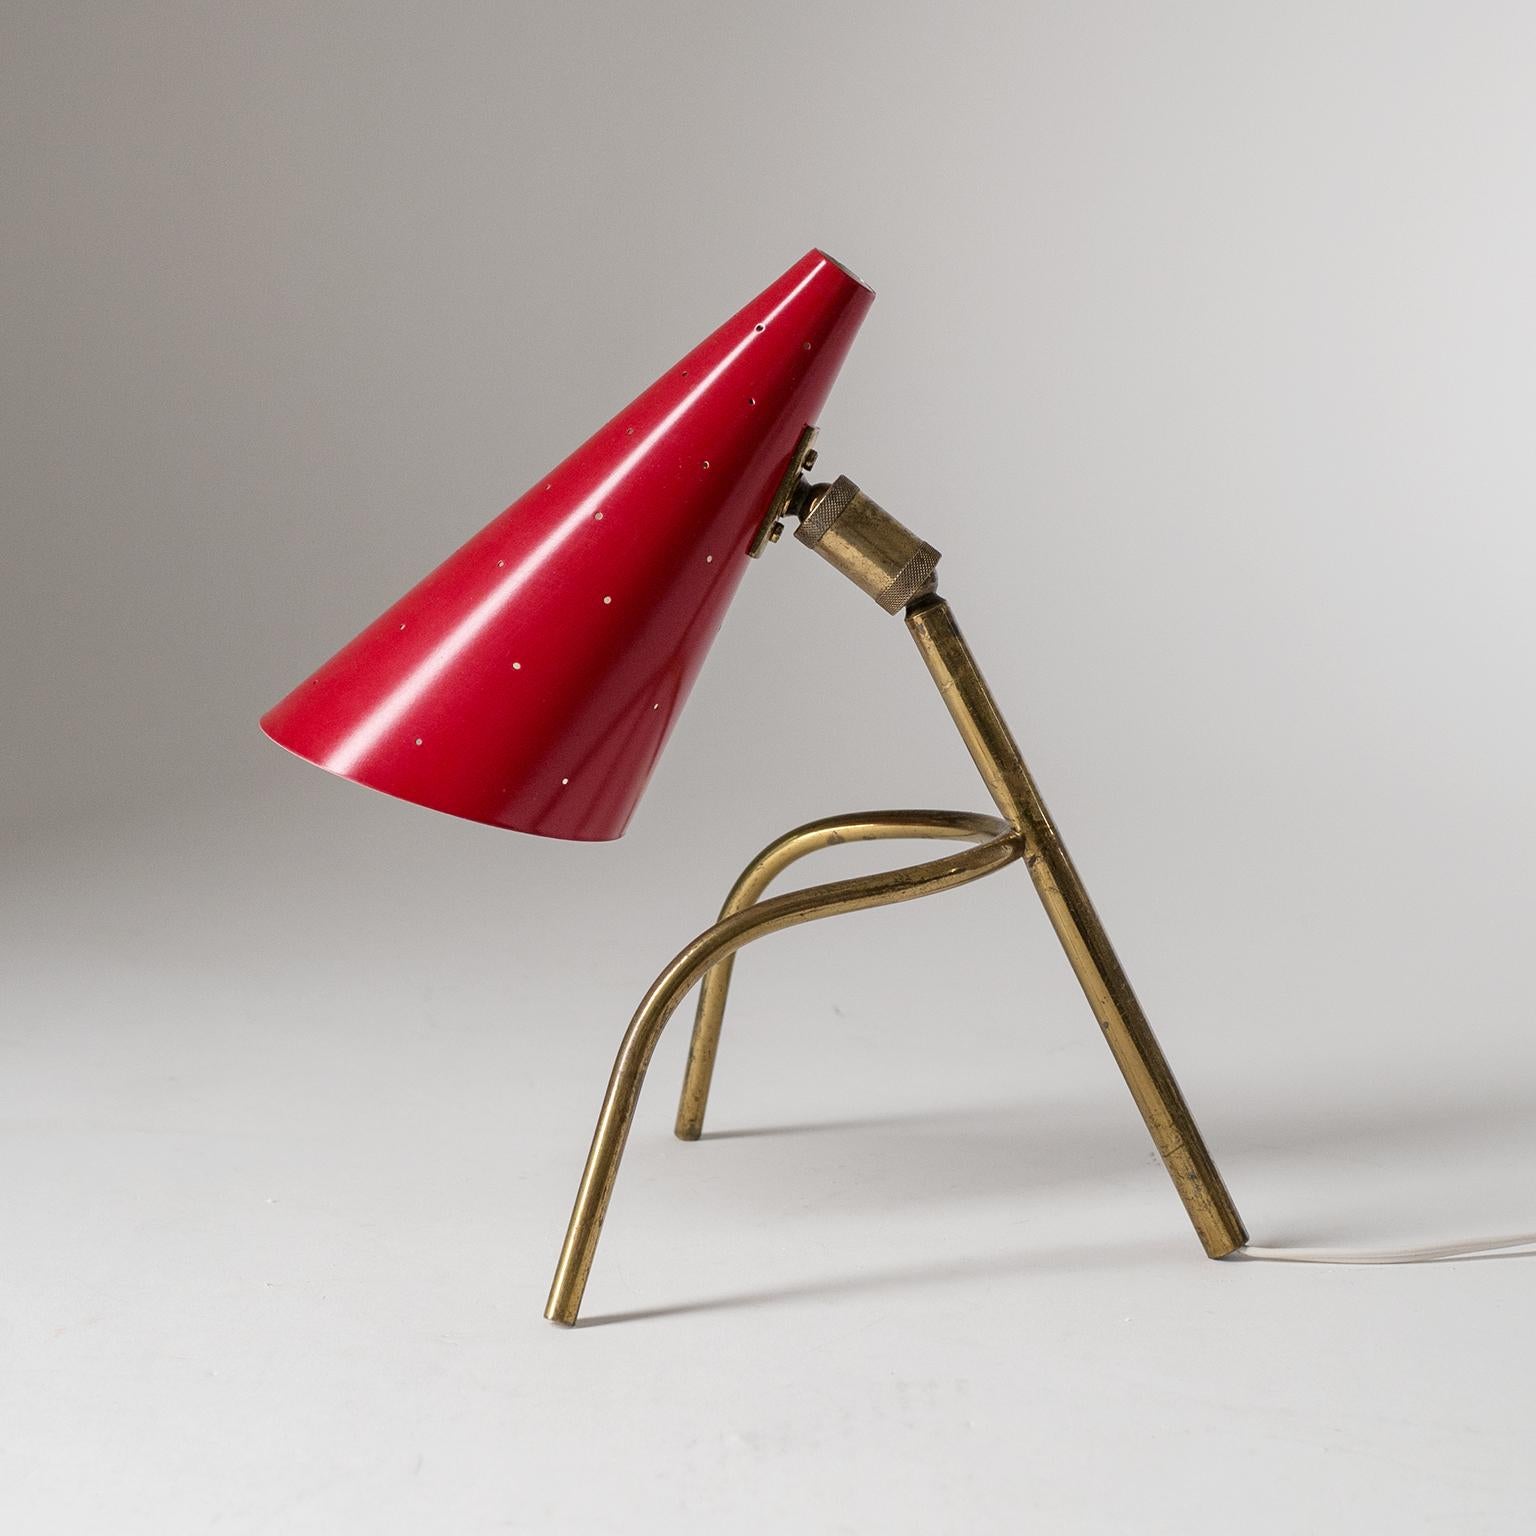 Rare Italian desk lamp, circa 1950. Very unique tripod design with a lacquered and pierced aluminum cone shade. The pierced shade, which resembles early O-Luce wall lights, can be rotated and tilted 360º by way of the rare double-joint it is